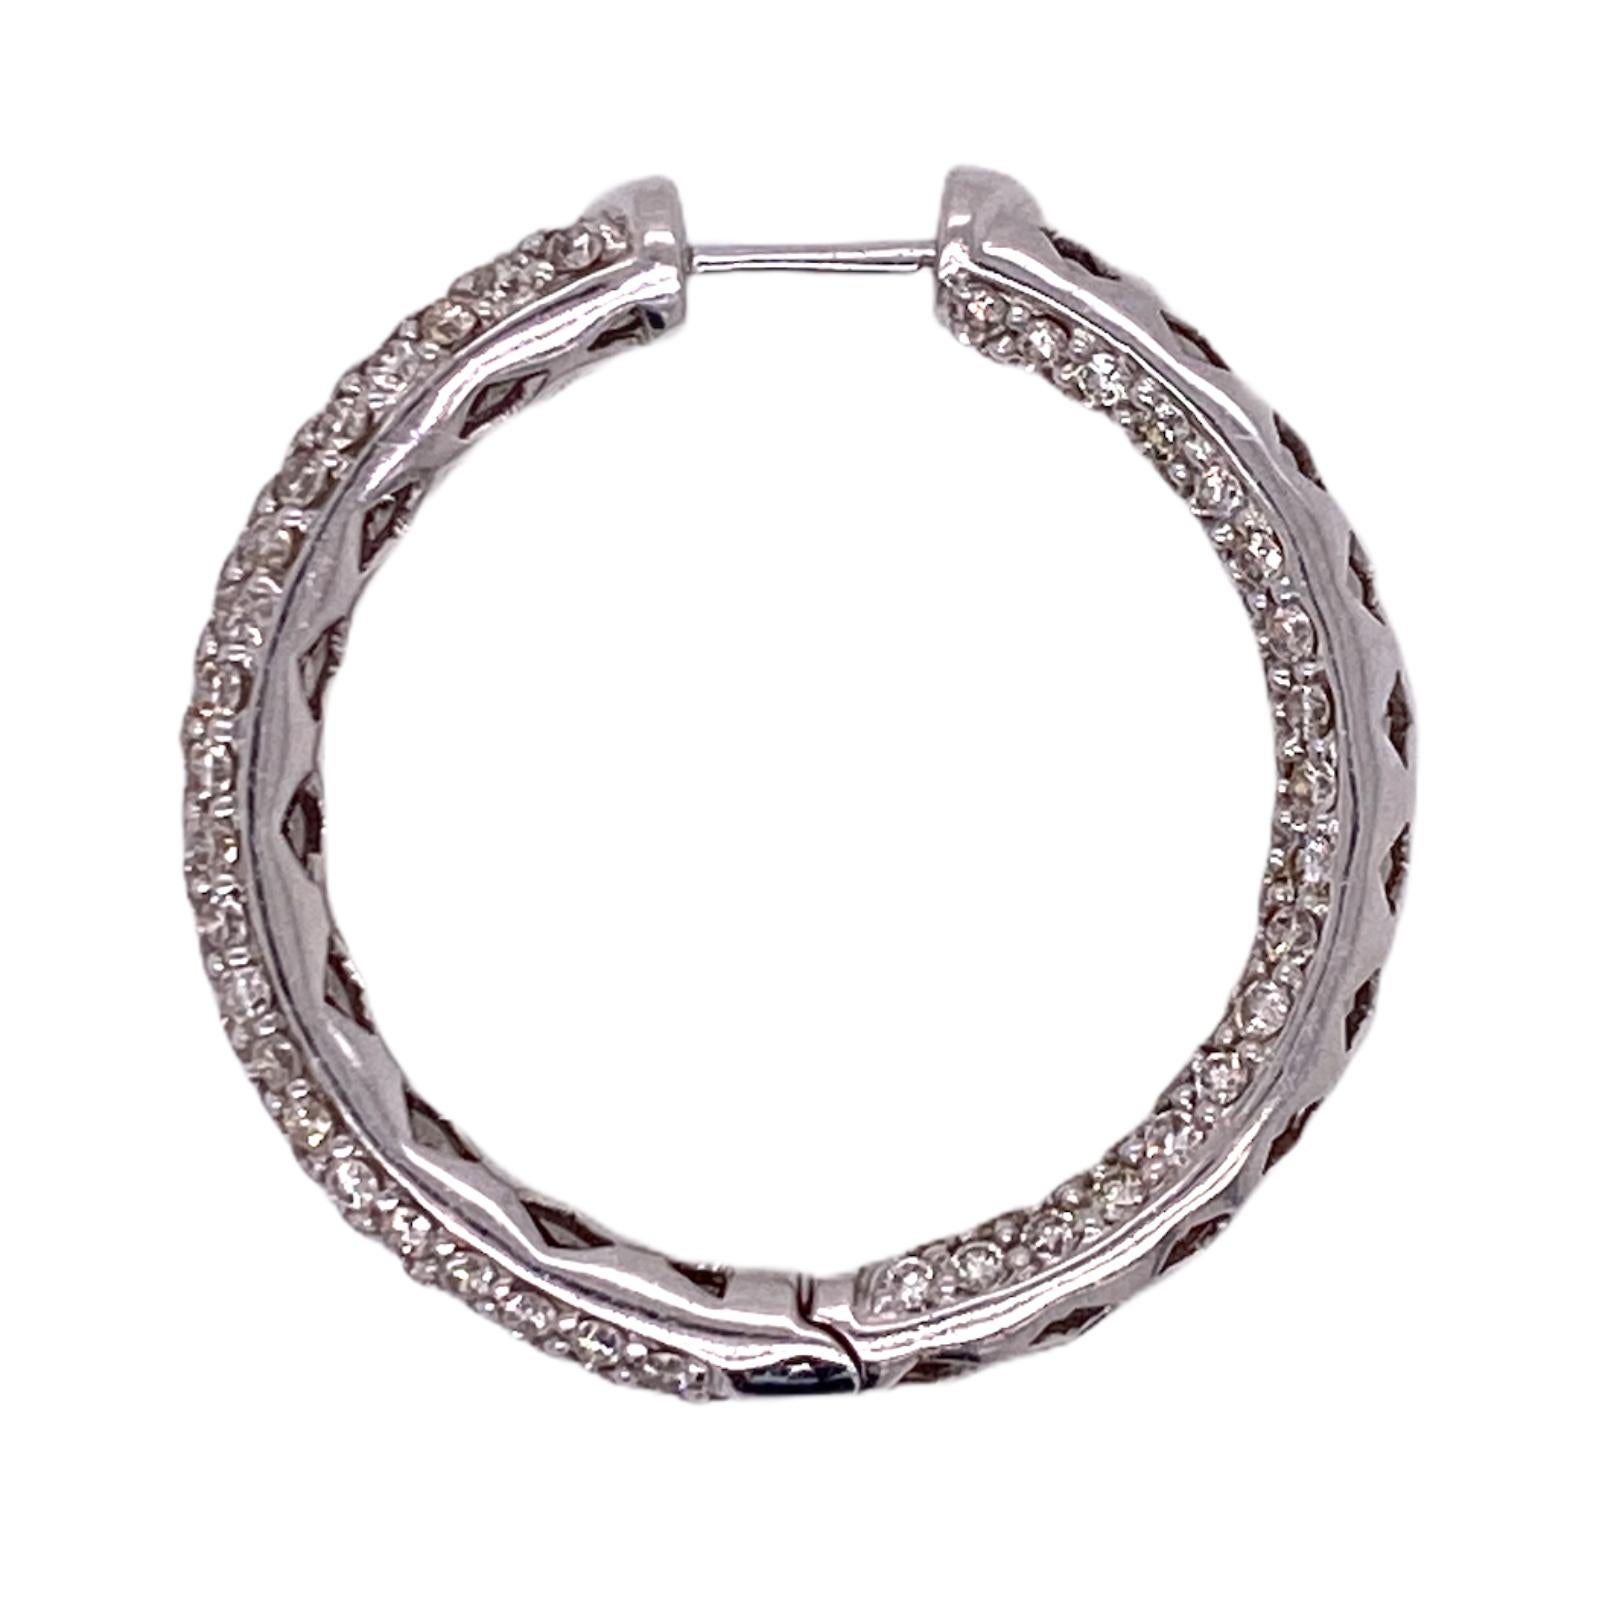 Women's 5.00 CTW Diamond Pave Hoop In and Out 18 Karat White Gold Earrings